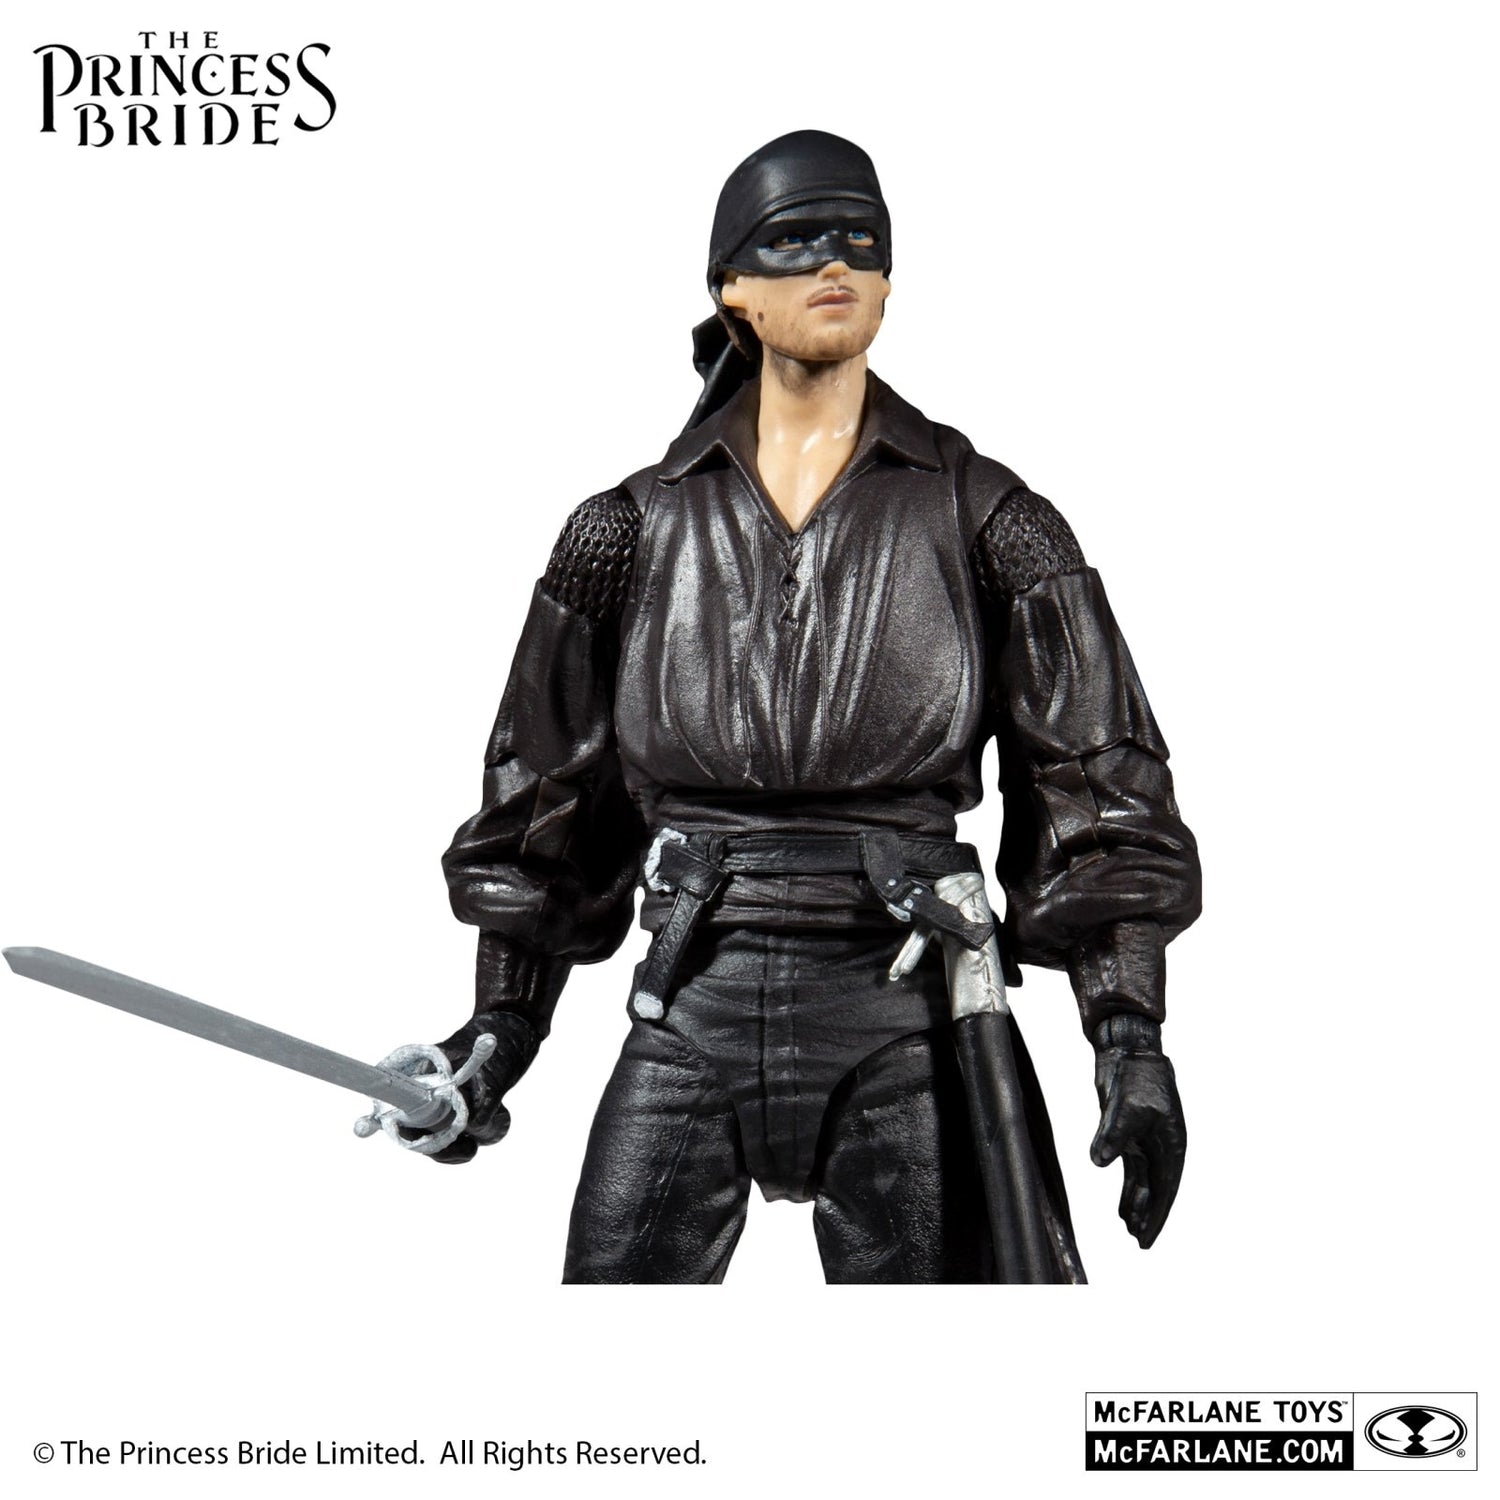 The Princess Bride: Dread Pirate Roberts 7" Figure - The Fourth Place